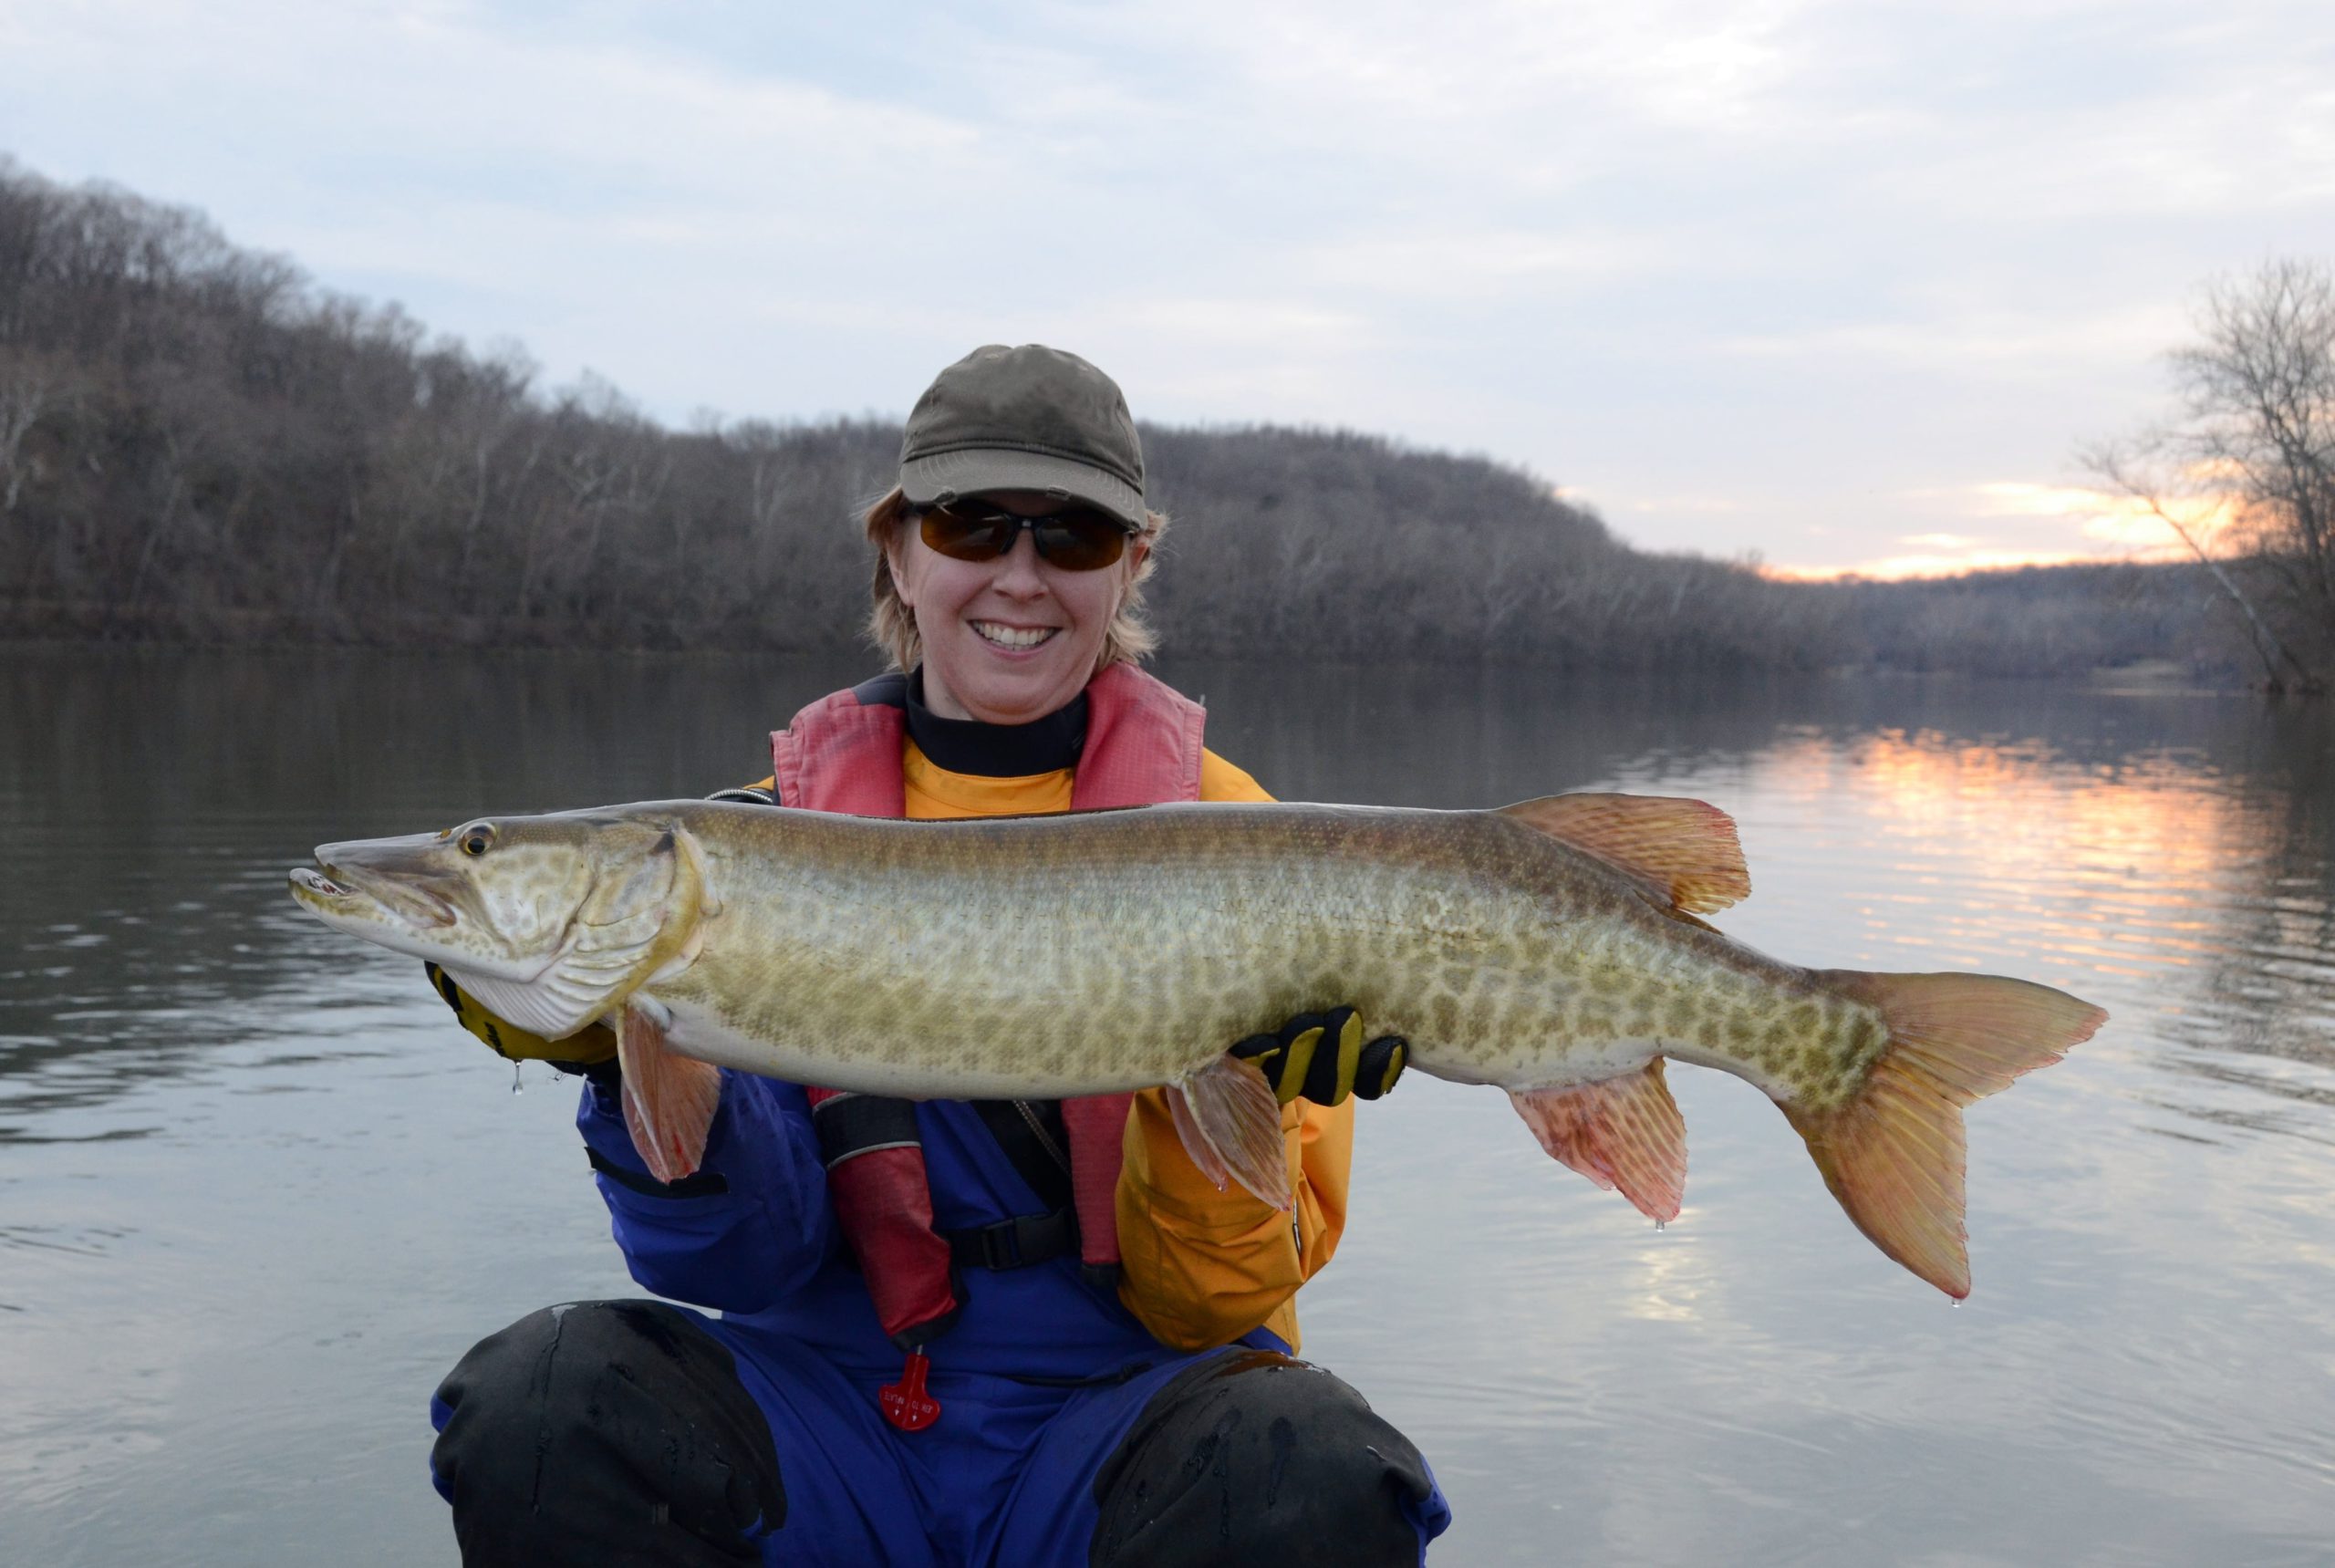 Angler holding a muskellunge fish on a kayak in water.